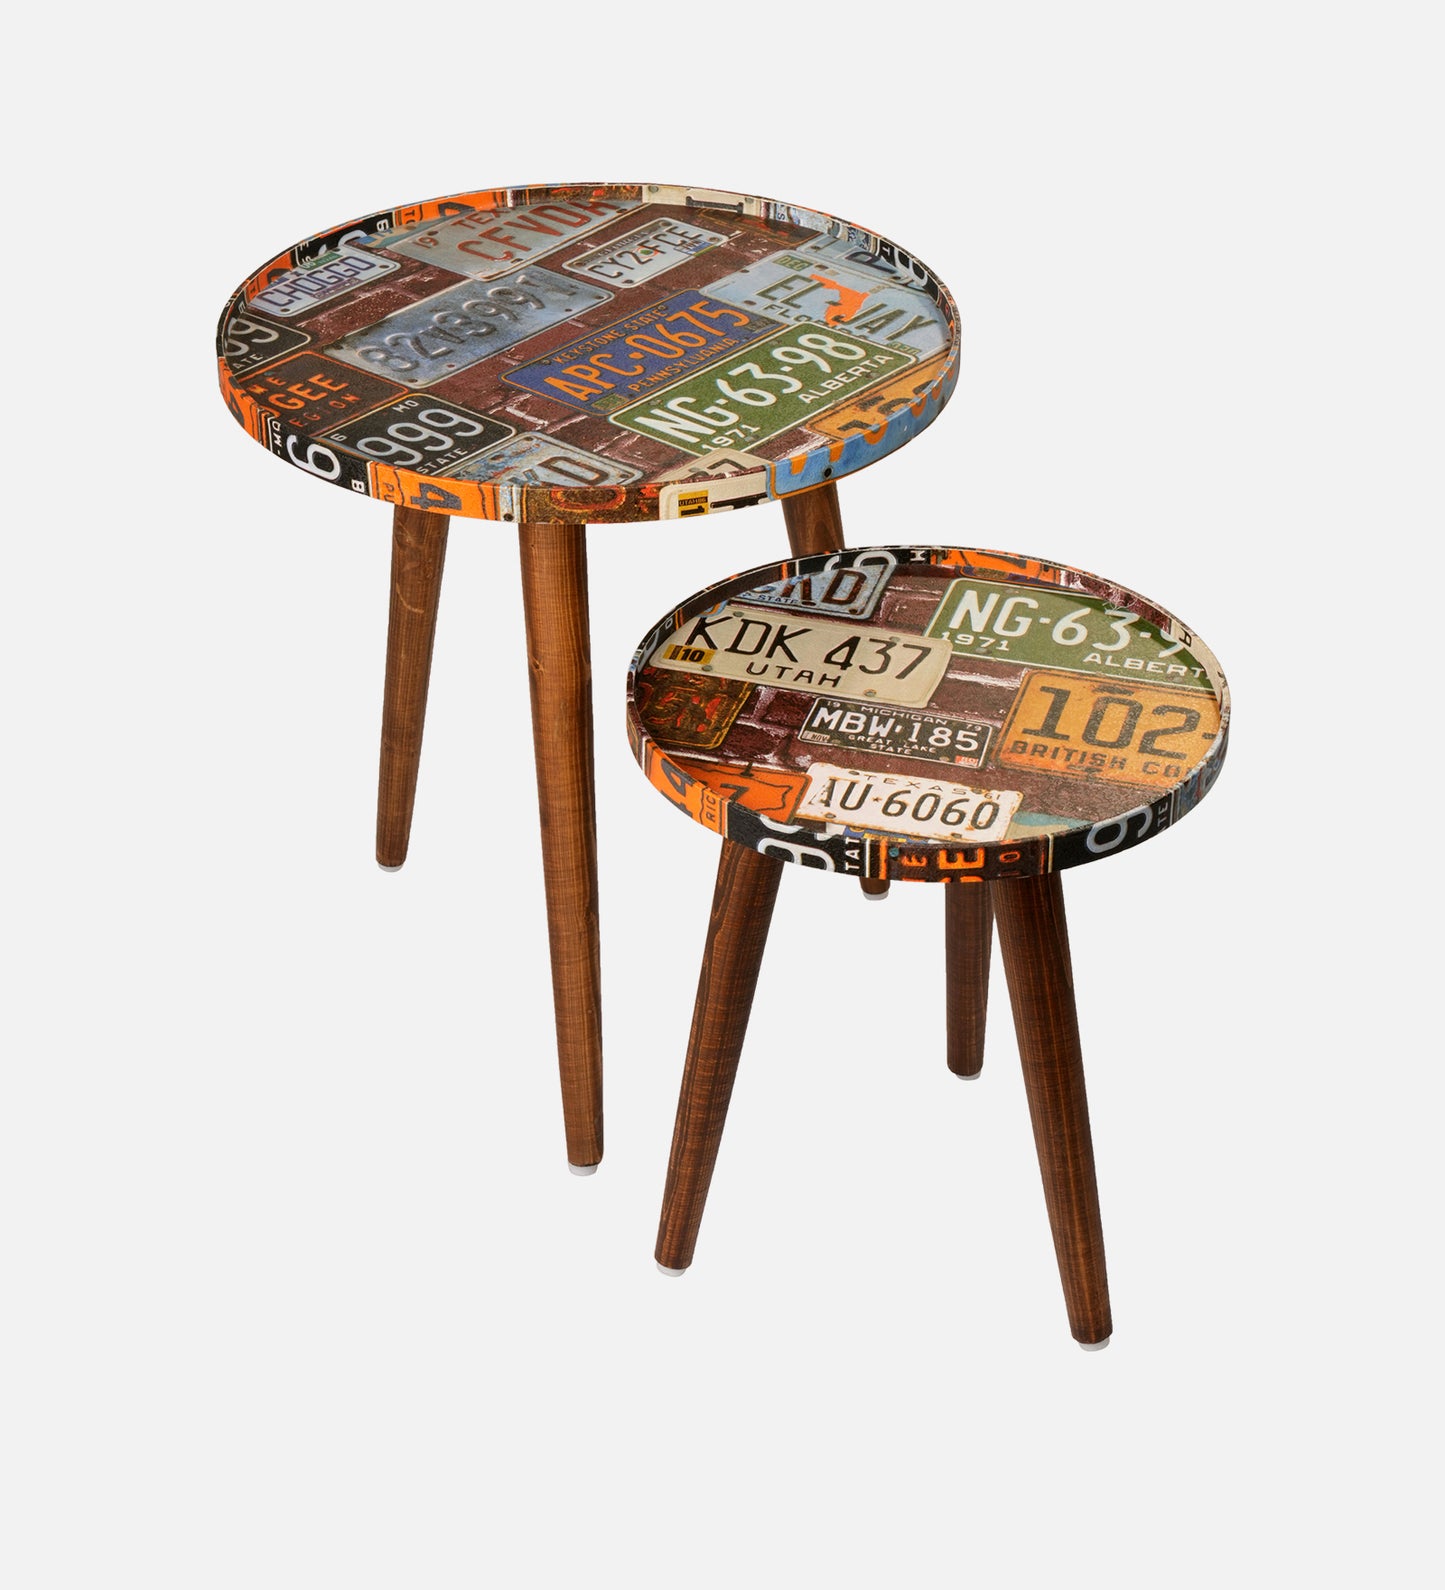 Muddy Miles Round Nesting Tables with Wooden Legs, Side Tables, Wooden Tables, Living Room Decor by A Tiny Mistake